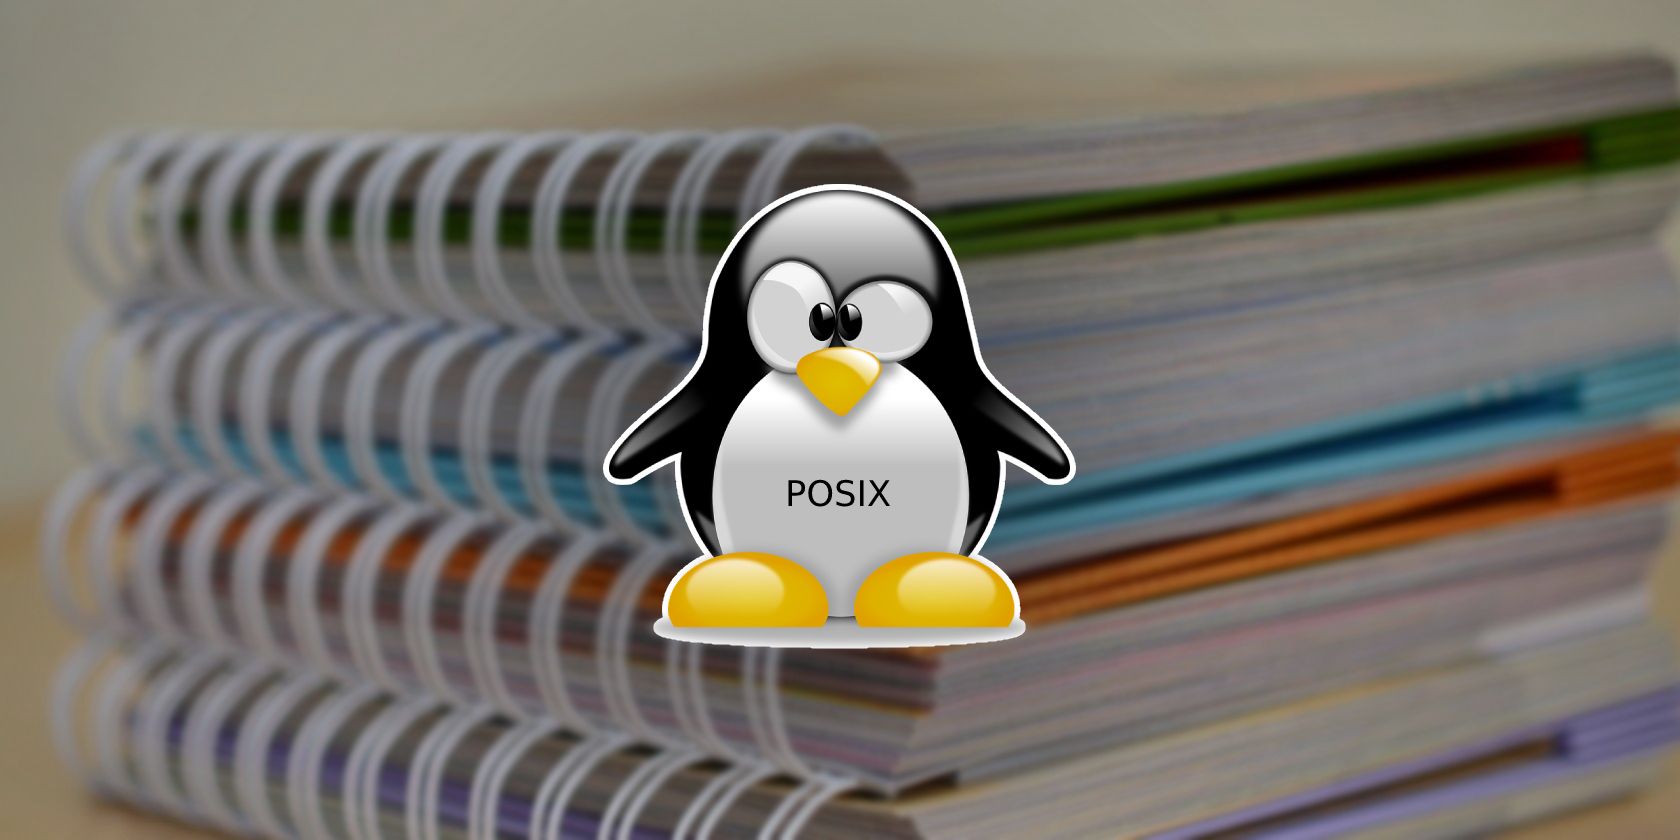 linux tux with posix